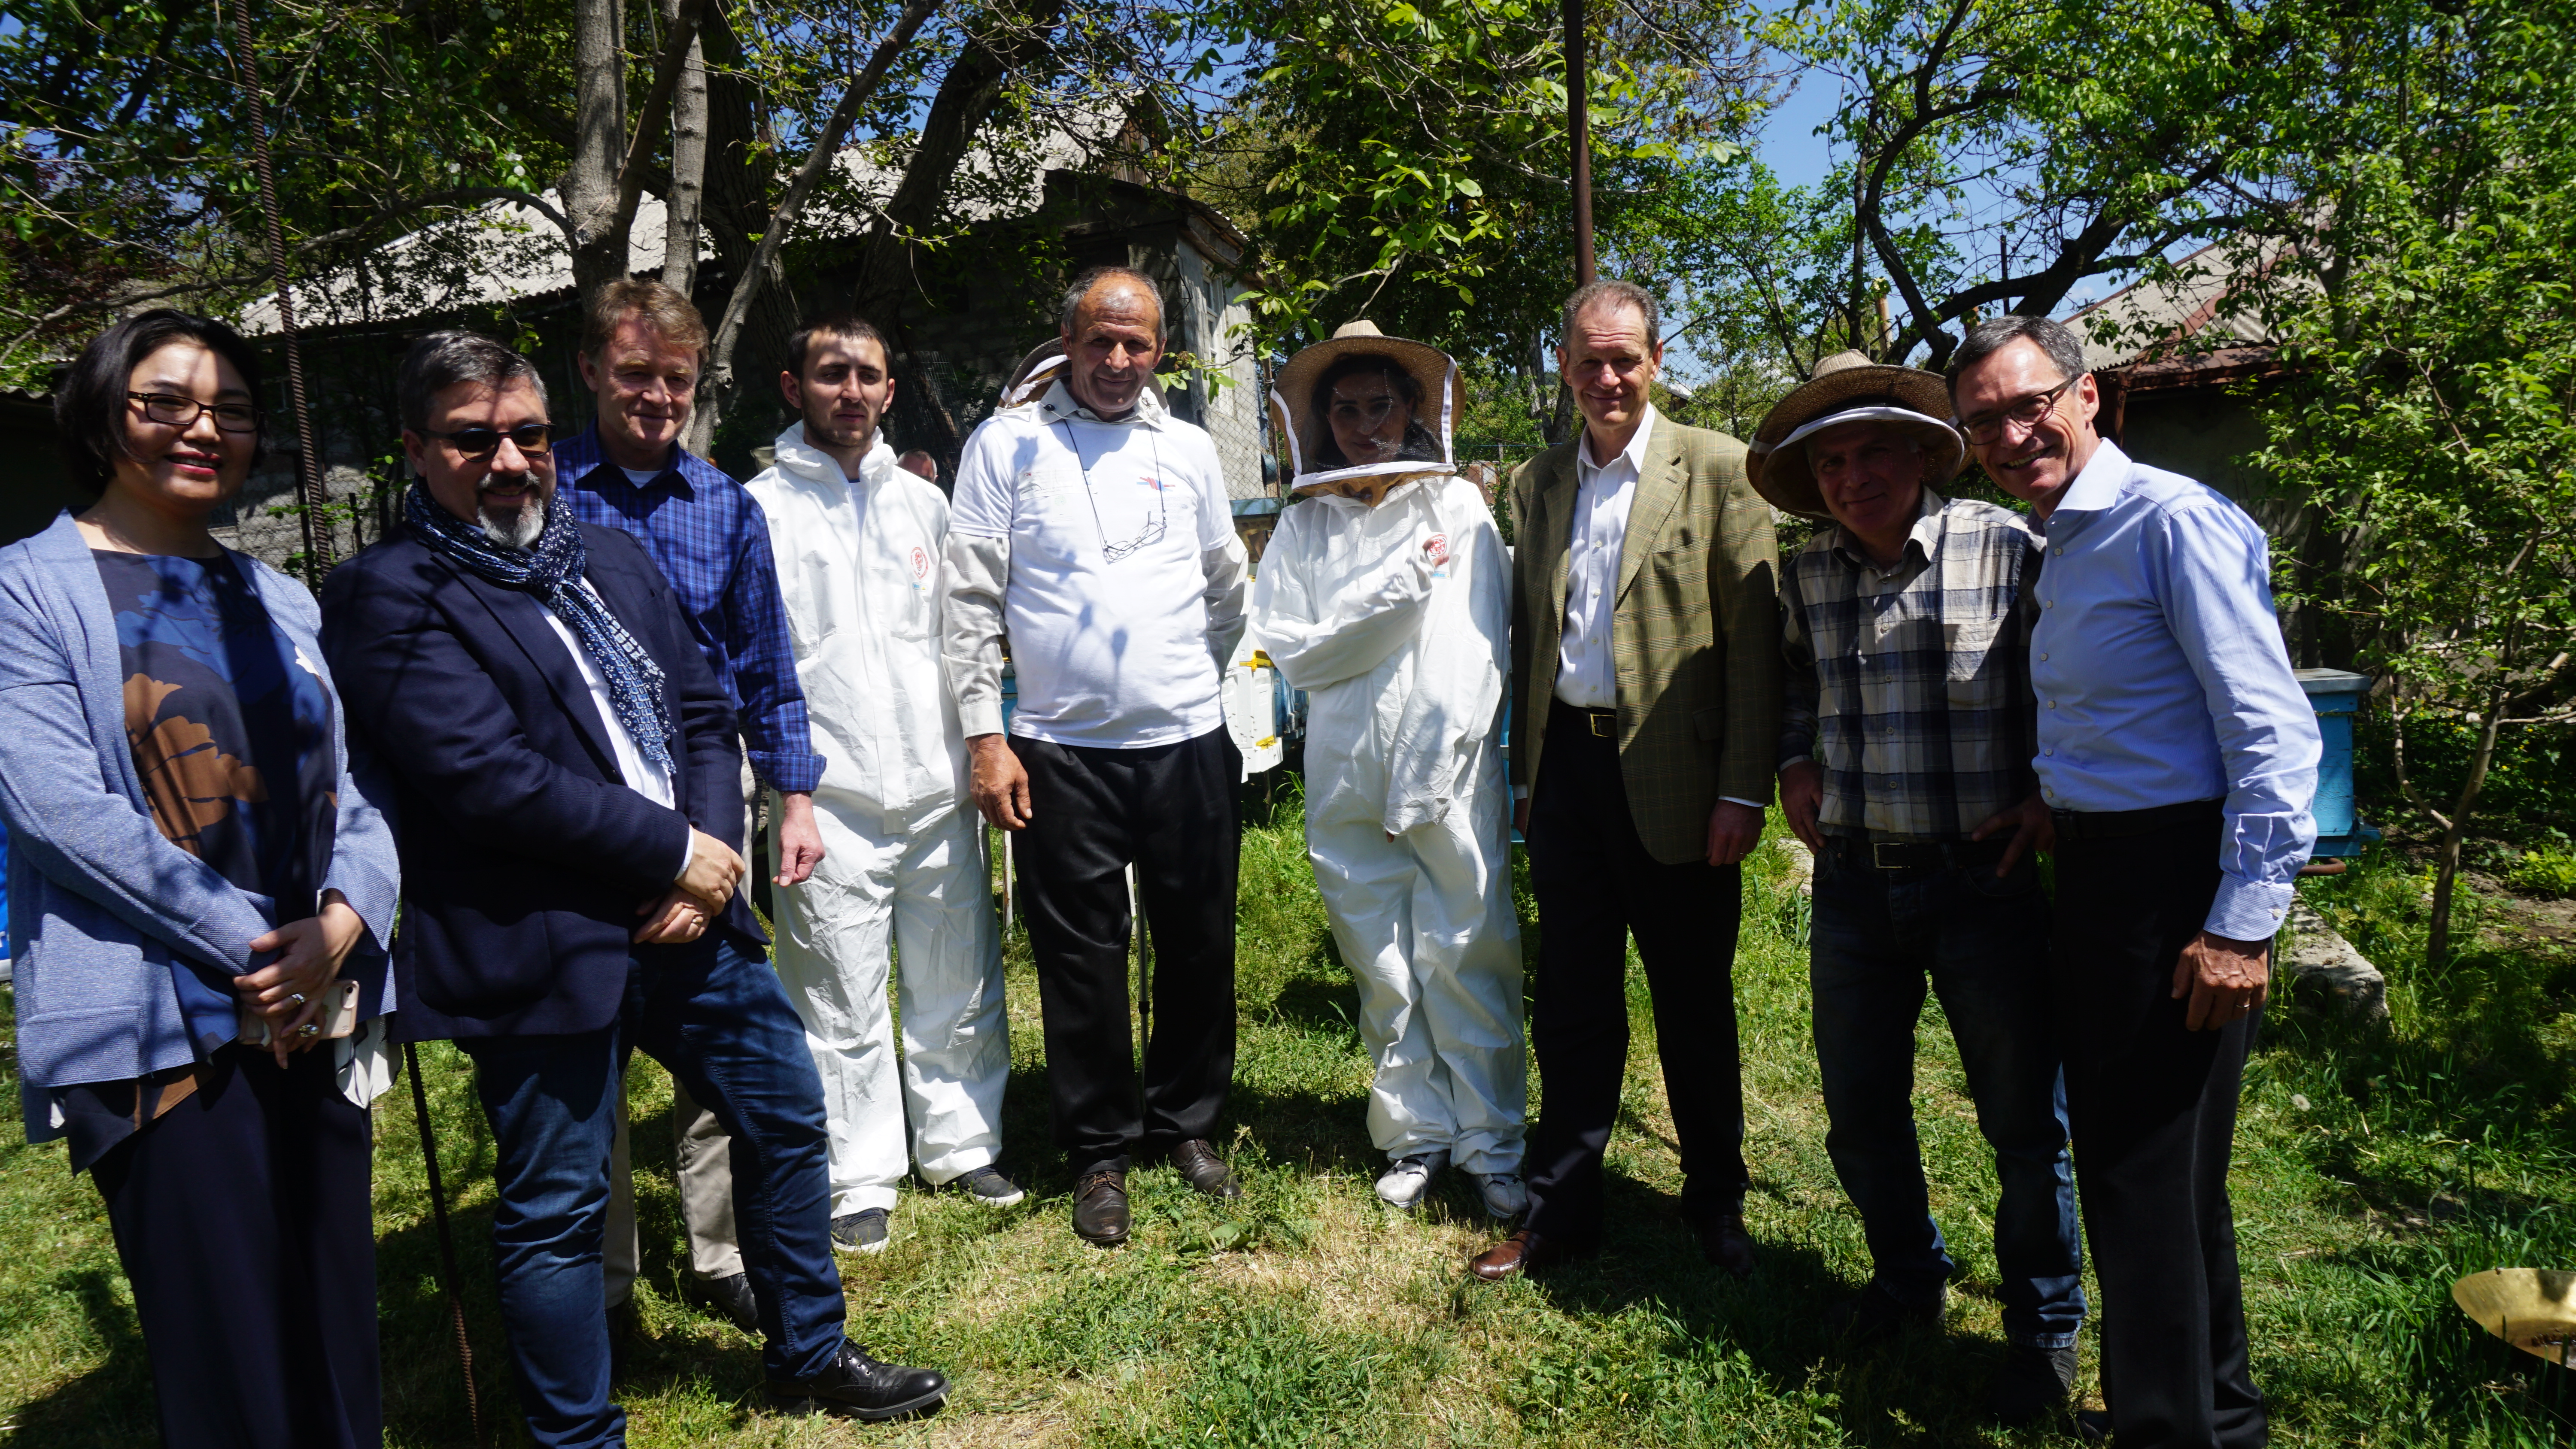 A groups photo with bee-keepers